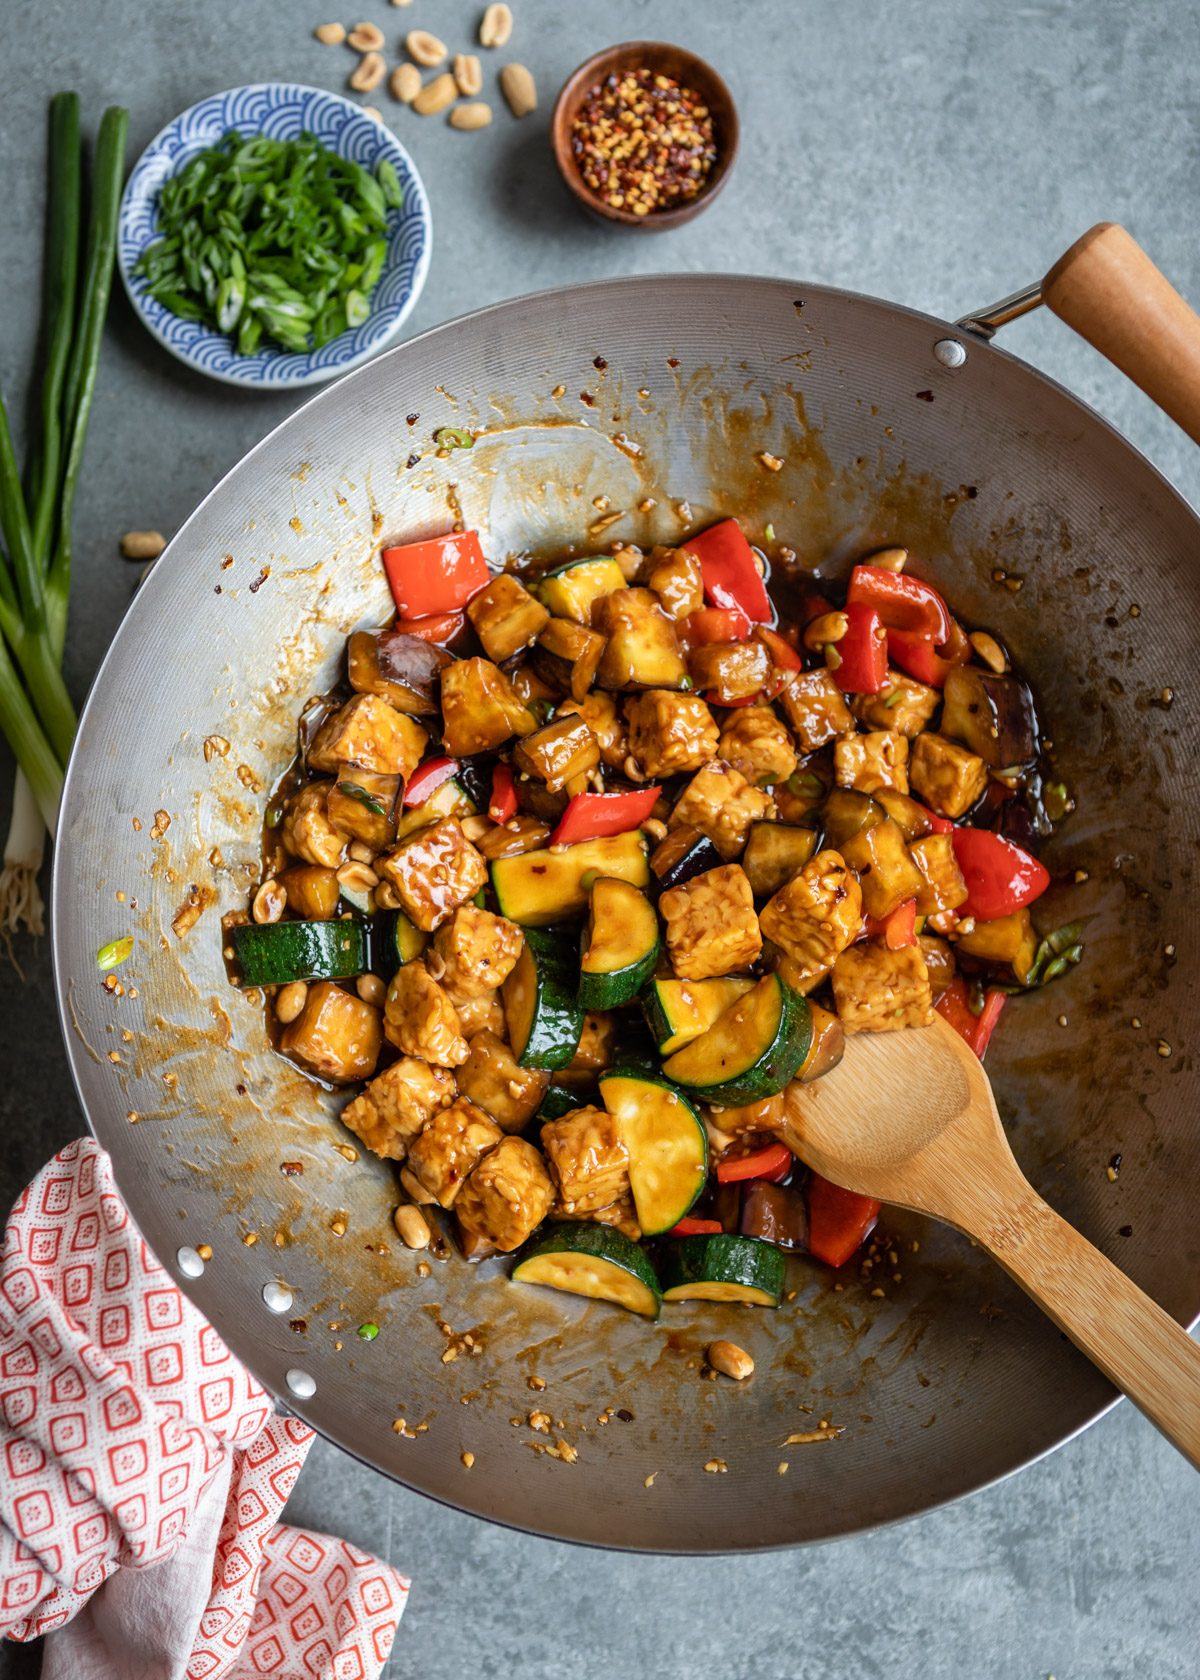 This Kung Pao Tempeh Is Sweet, Spicy, and Better Than Takeout